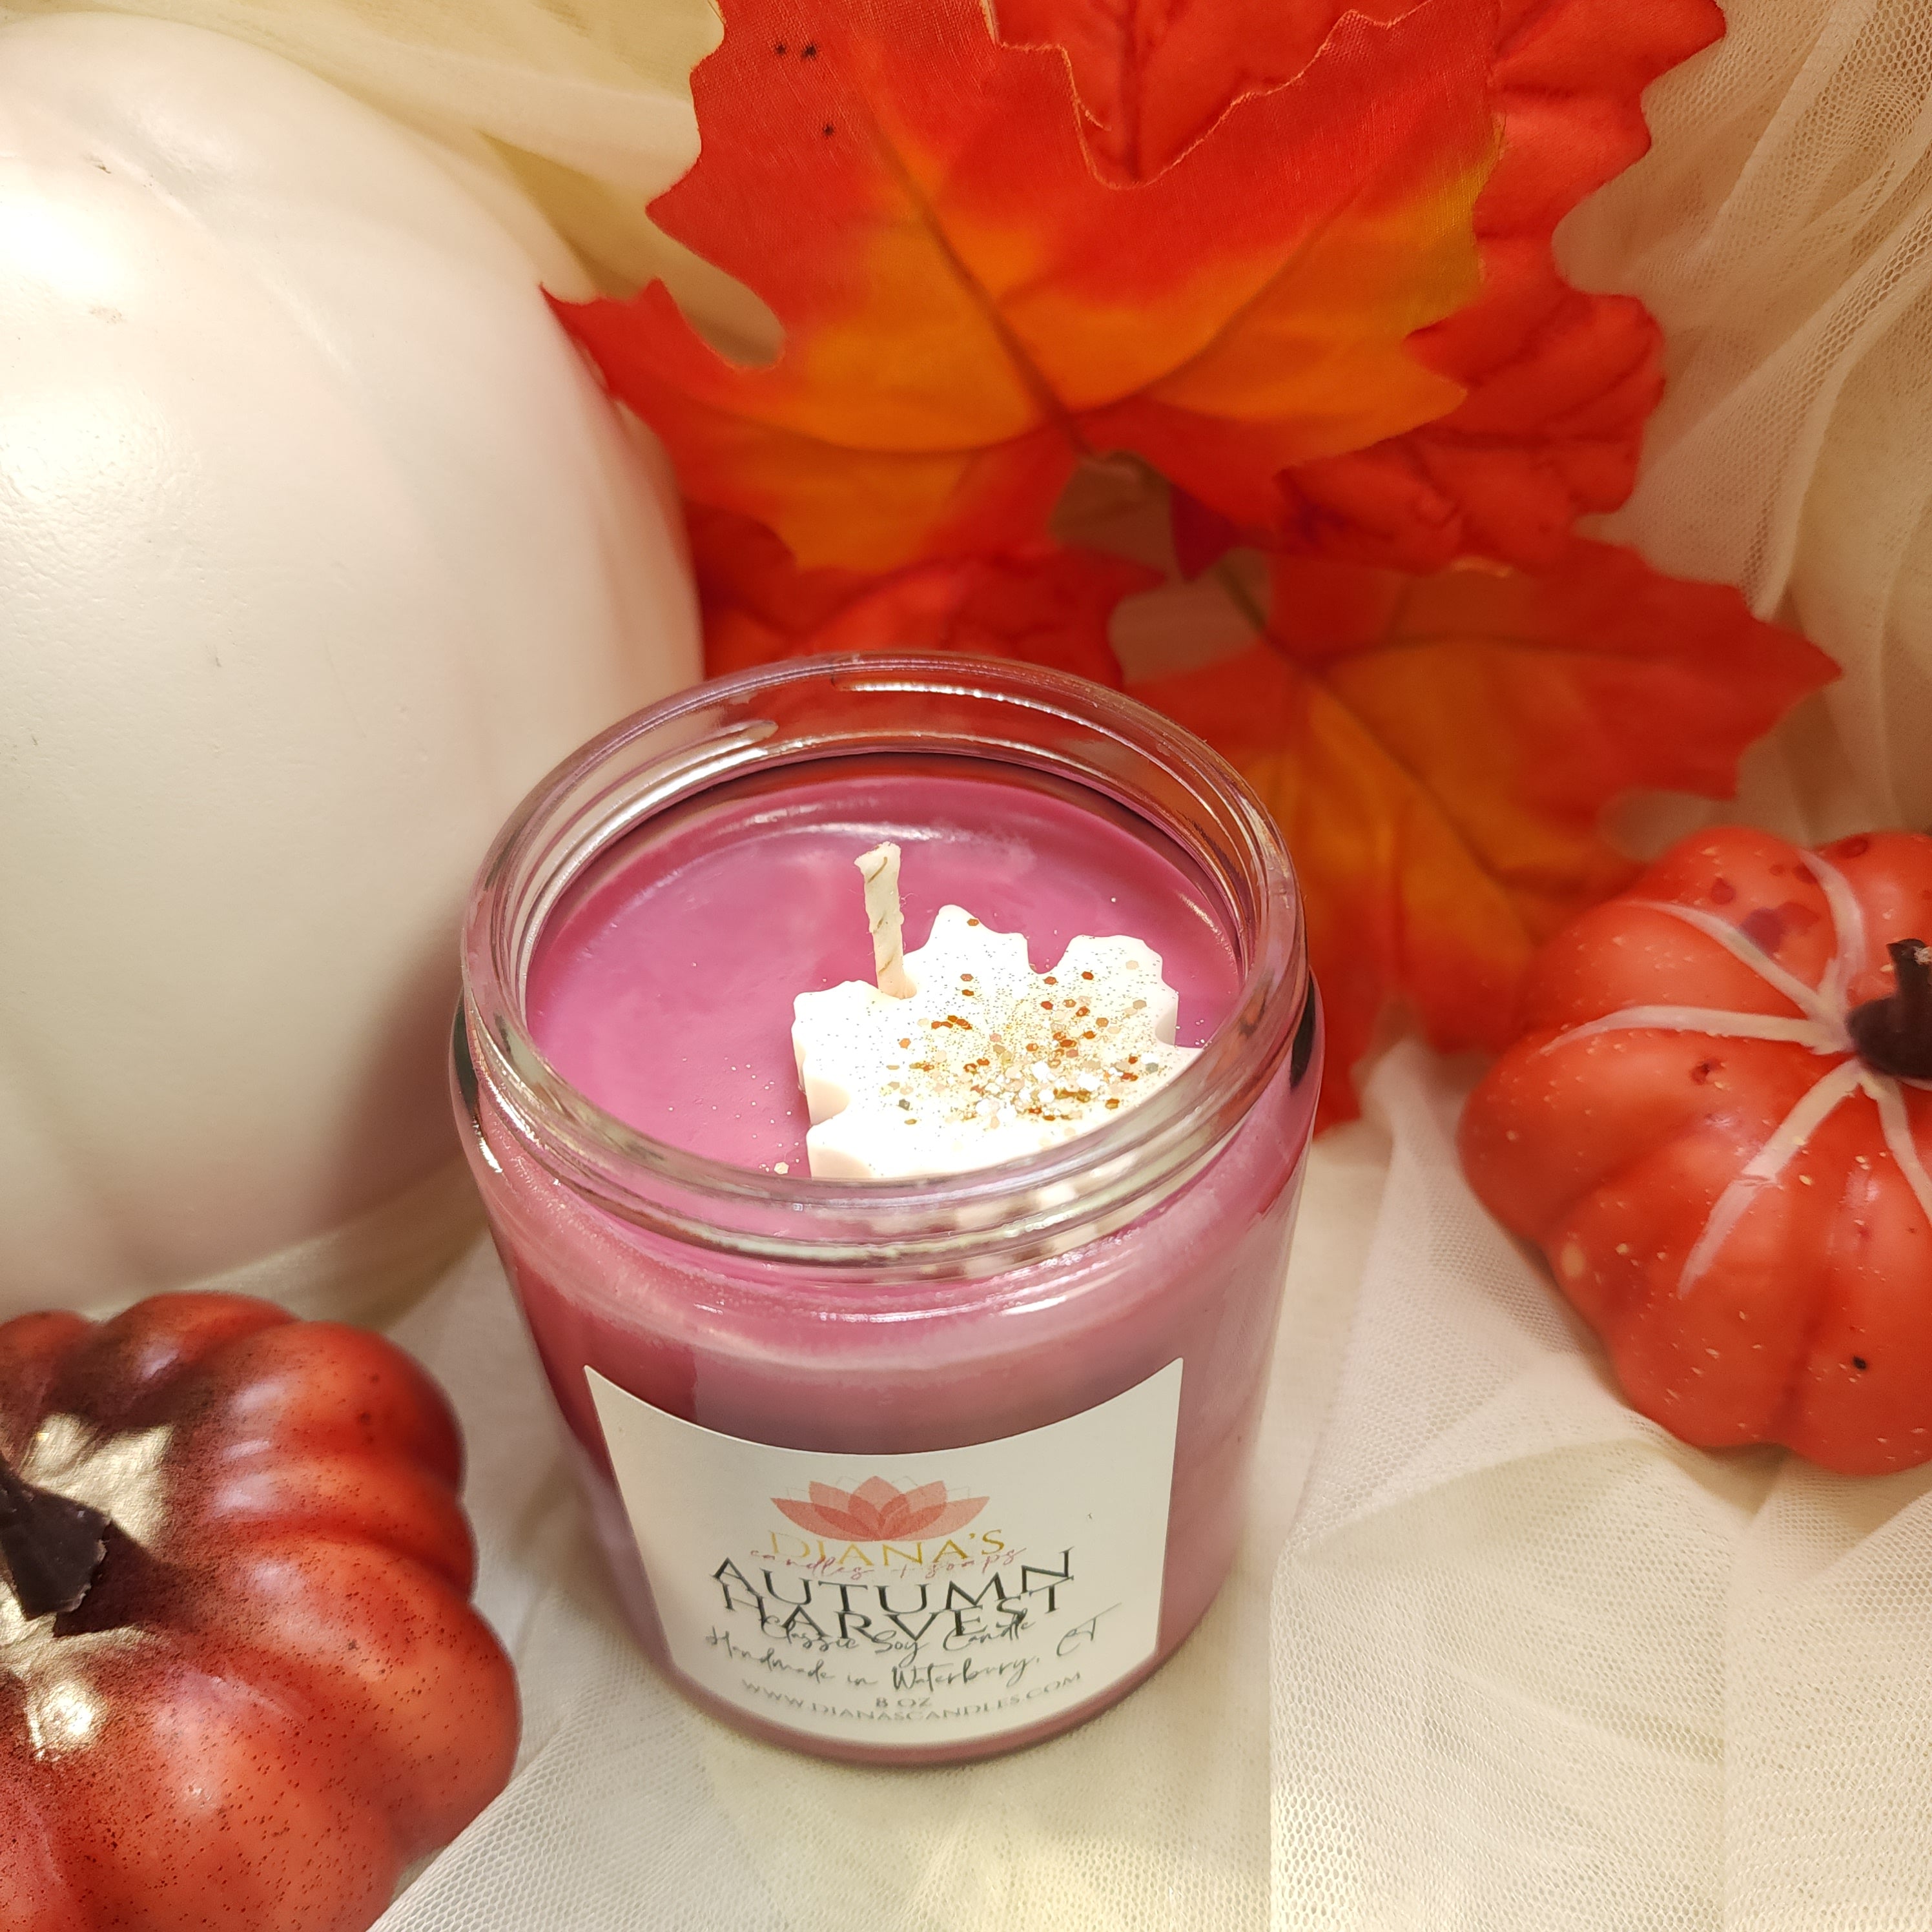 Autumn Harvest Jar Candle Diana's Candles and Soaps 